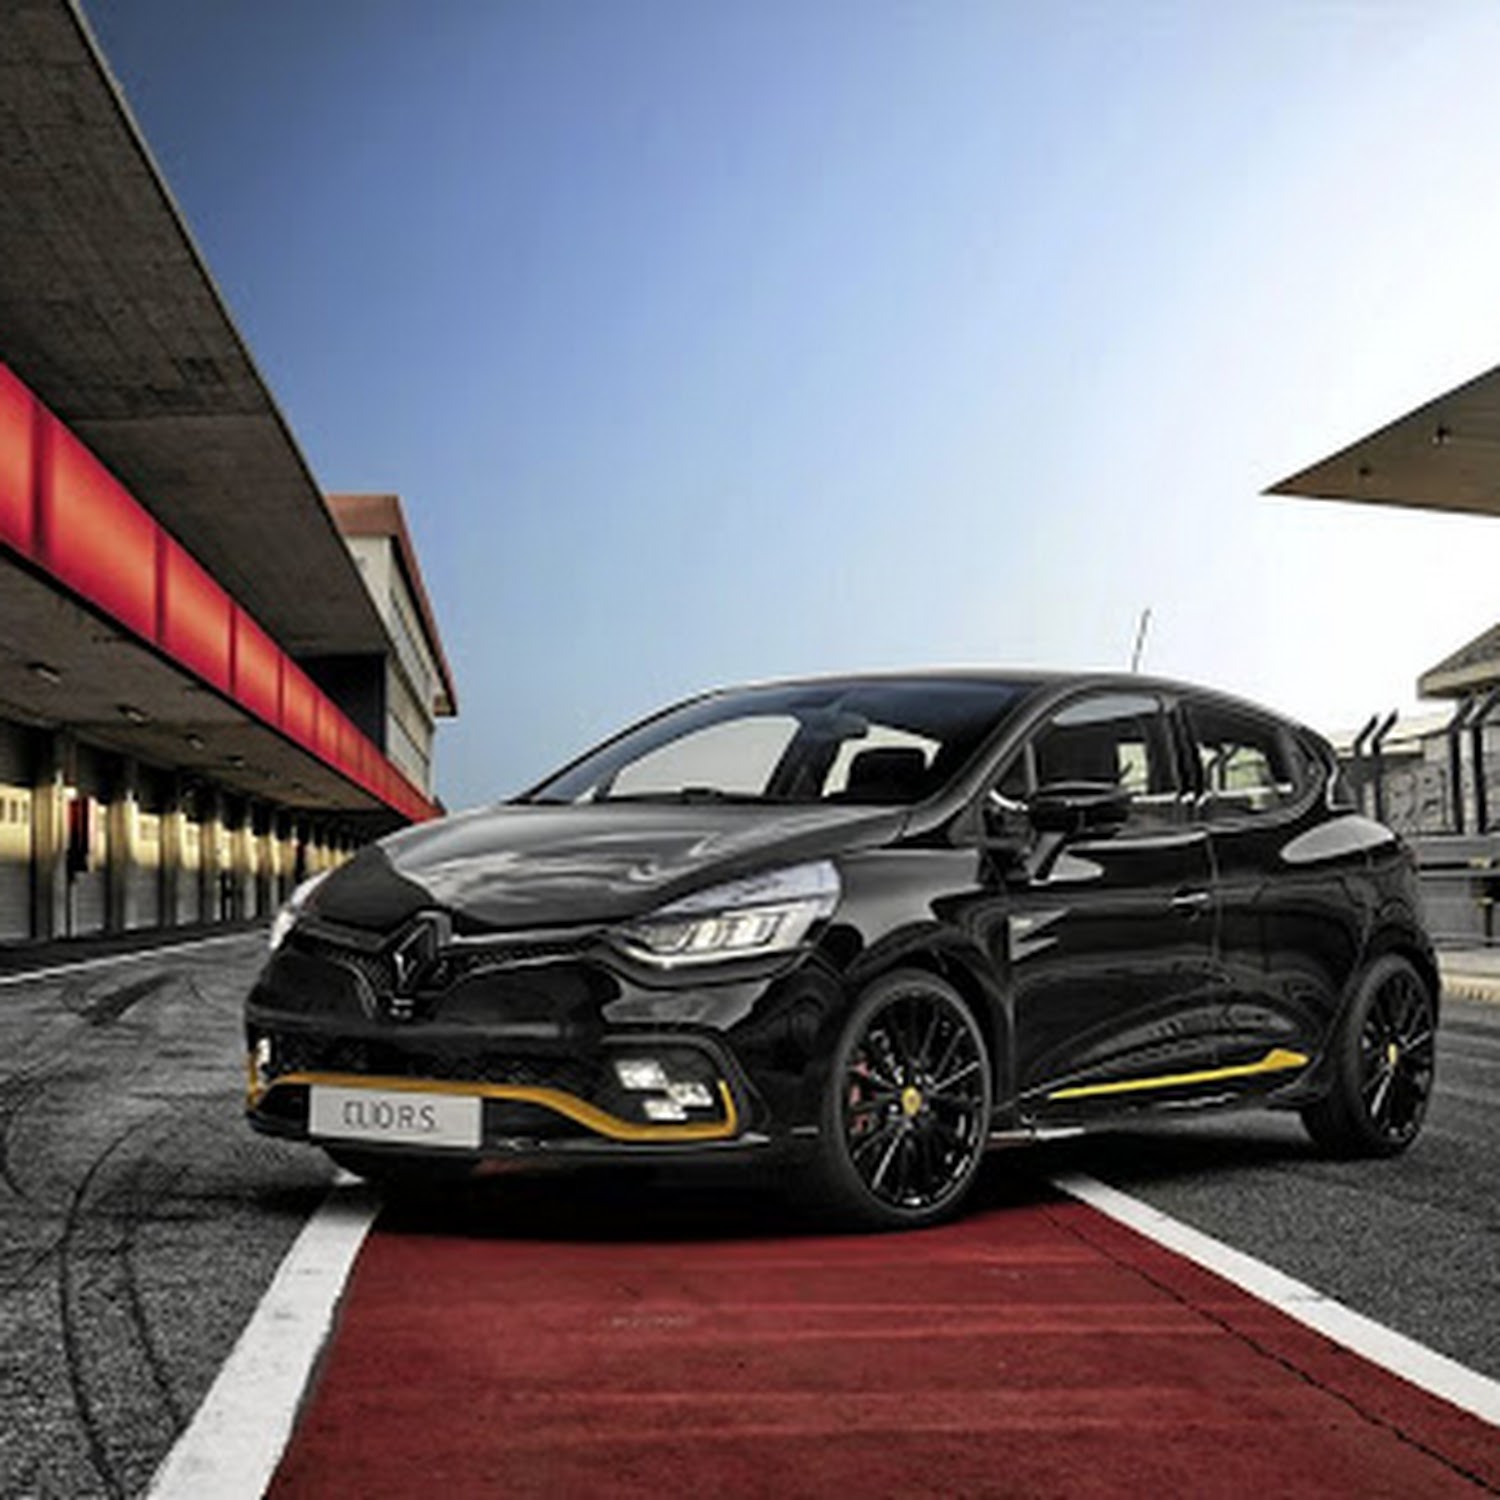 Goed koper rechtbank Limited edition Renault Clio is inspired by the racetrack